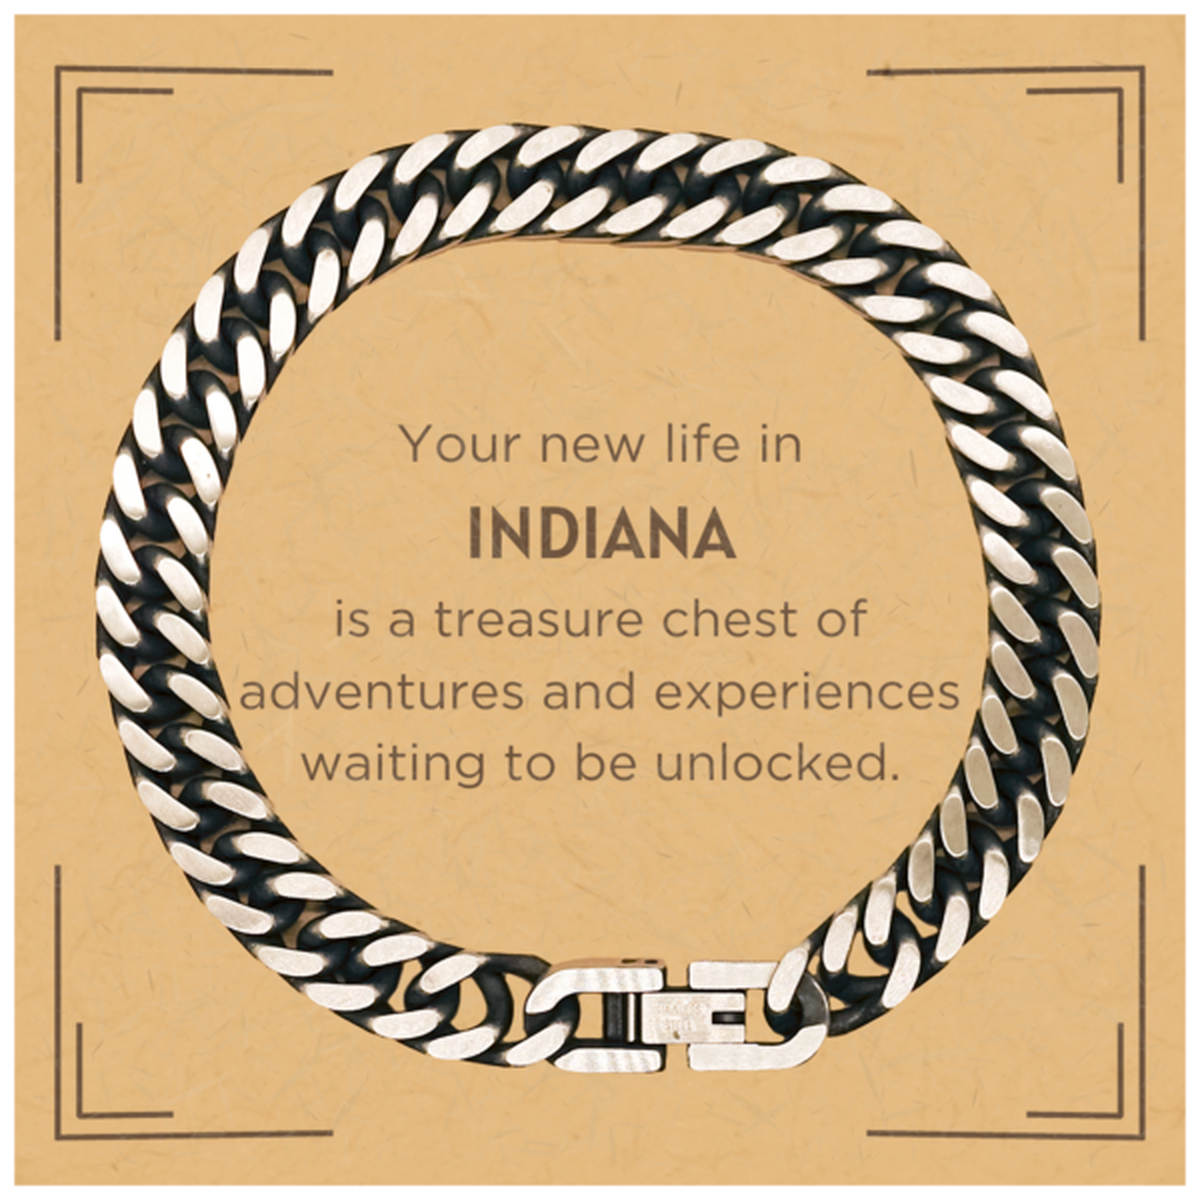 Moving to Indiana Gifts, Your new life in Indiana, Long Distance Indiana Christmas Cuban Link Chain Bracelet For Men, Women, Friends, Coworkers